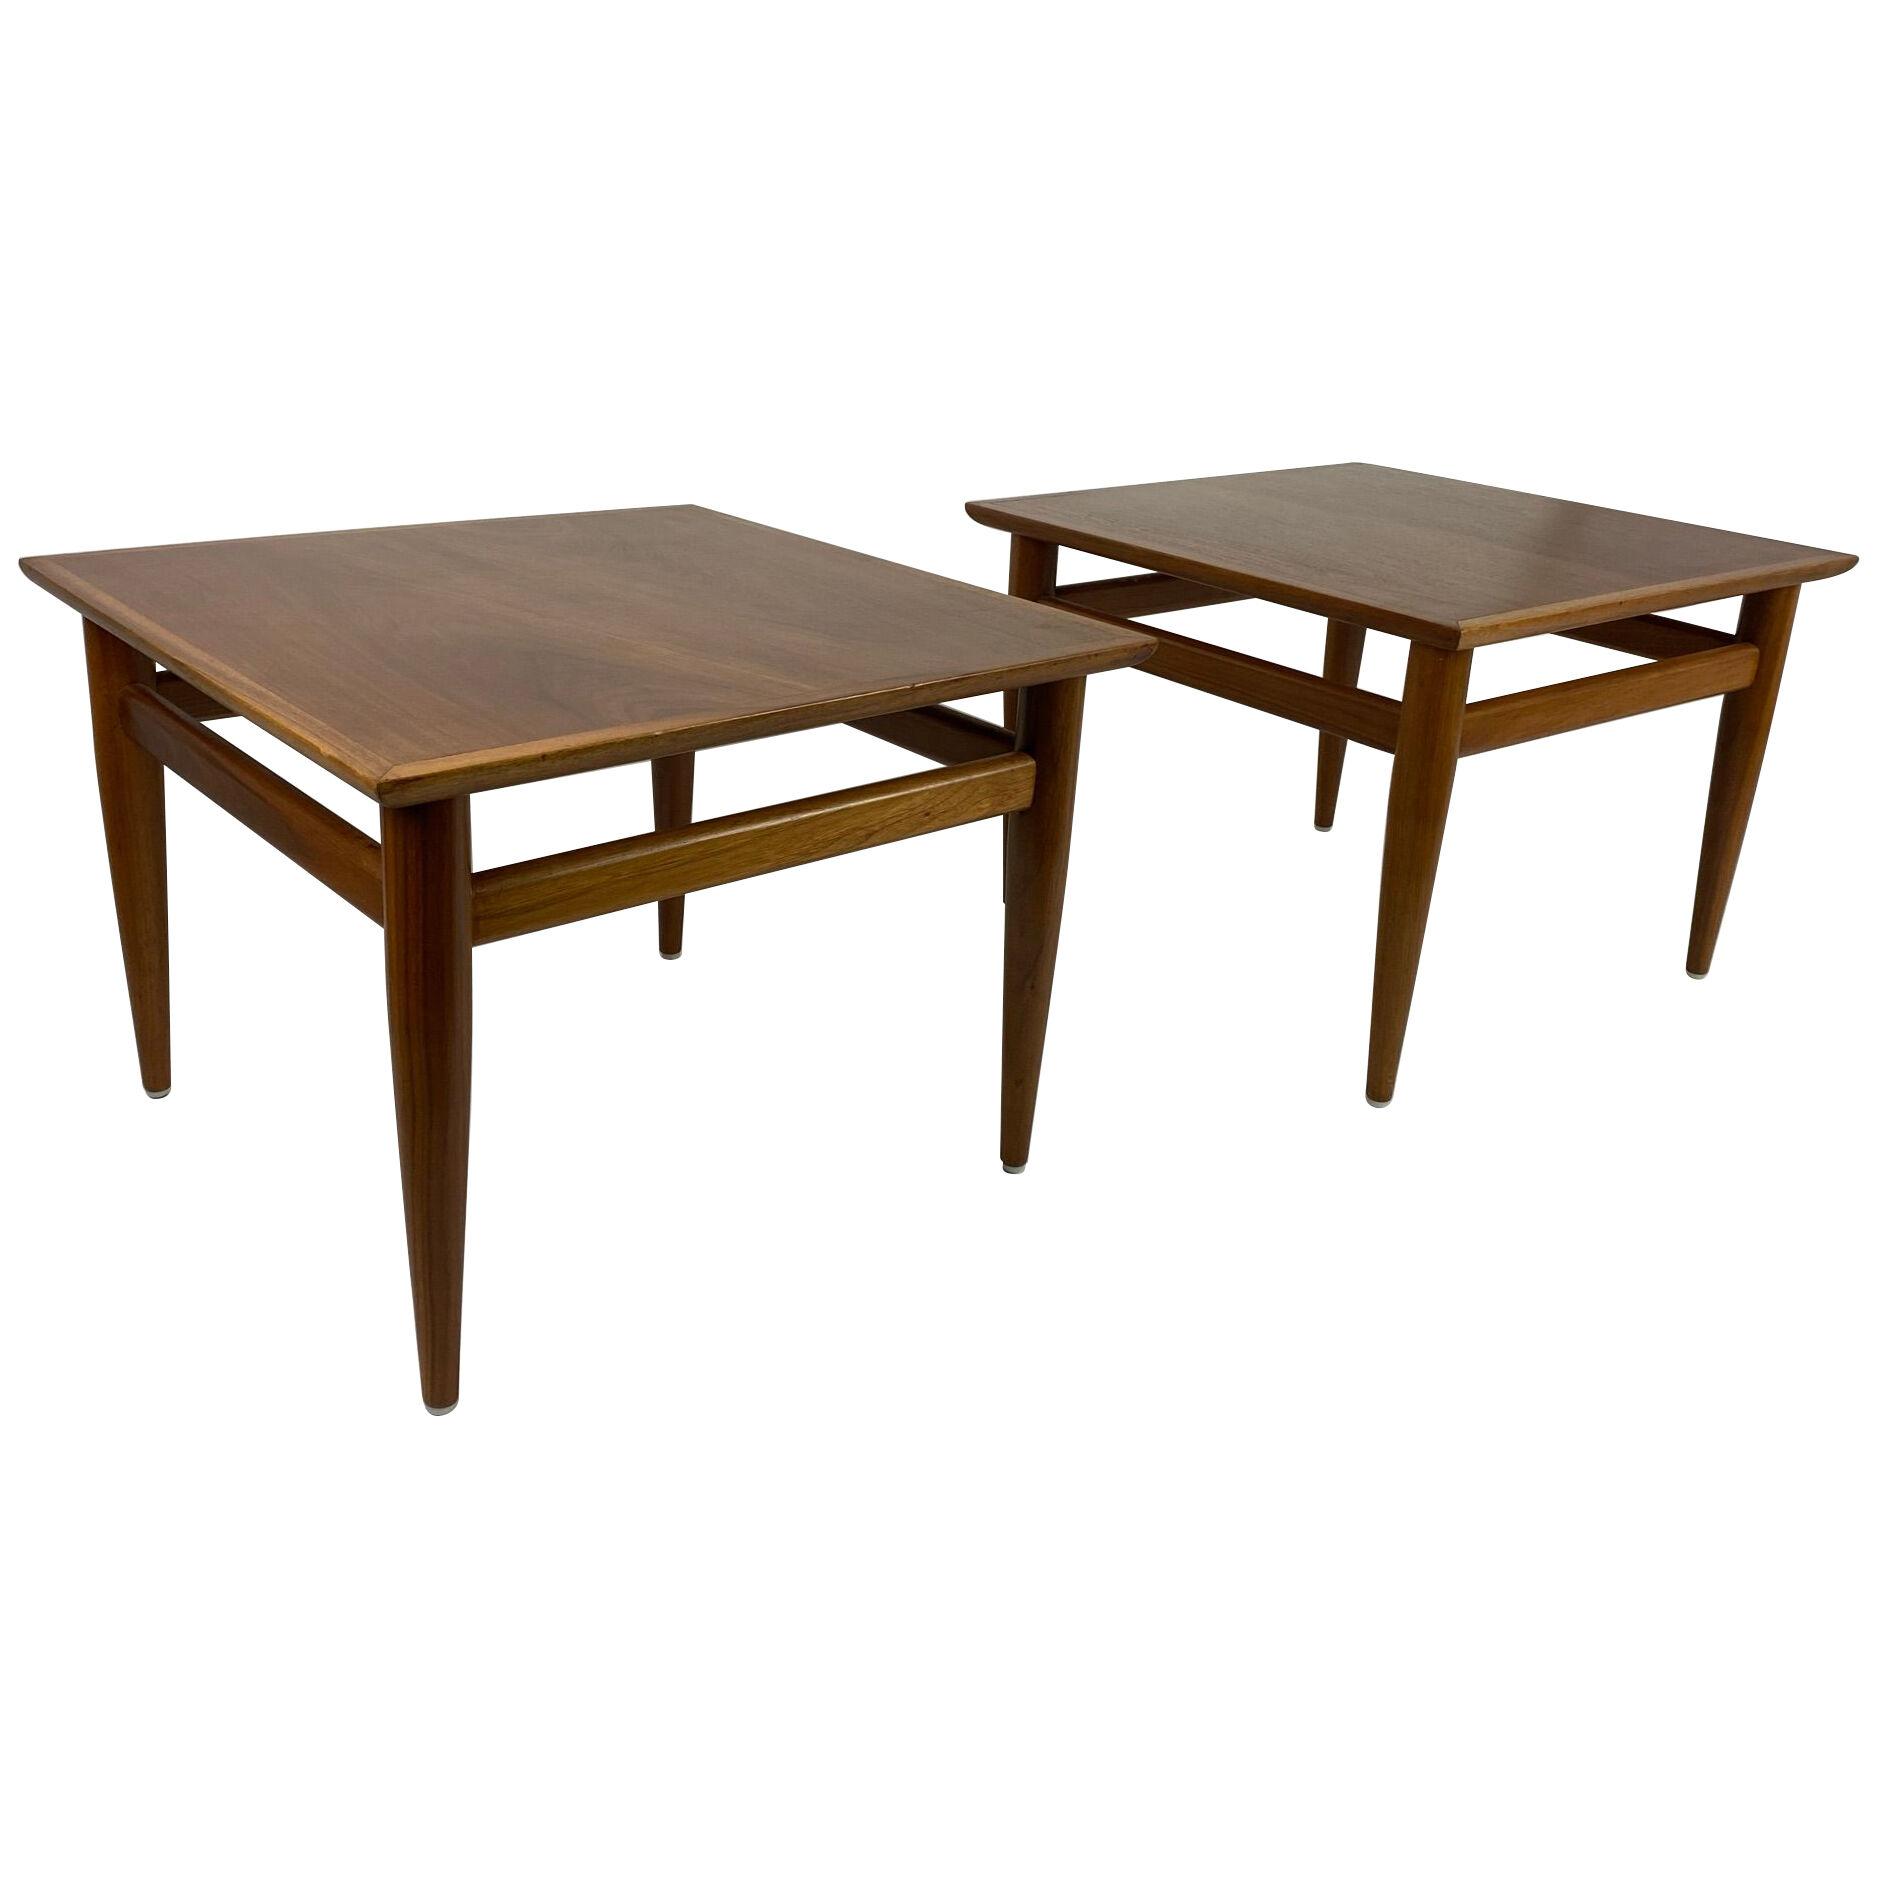 Pair of Mid-Century Square Walnut End Tables by Heritage Henredon, 1960s